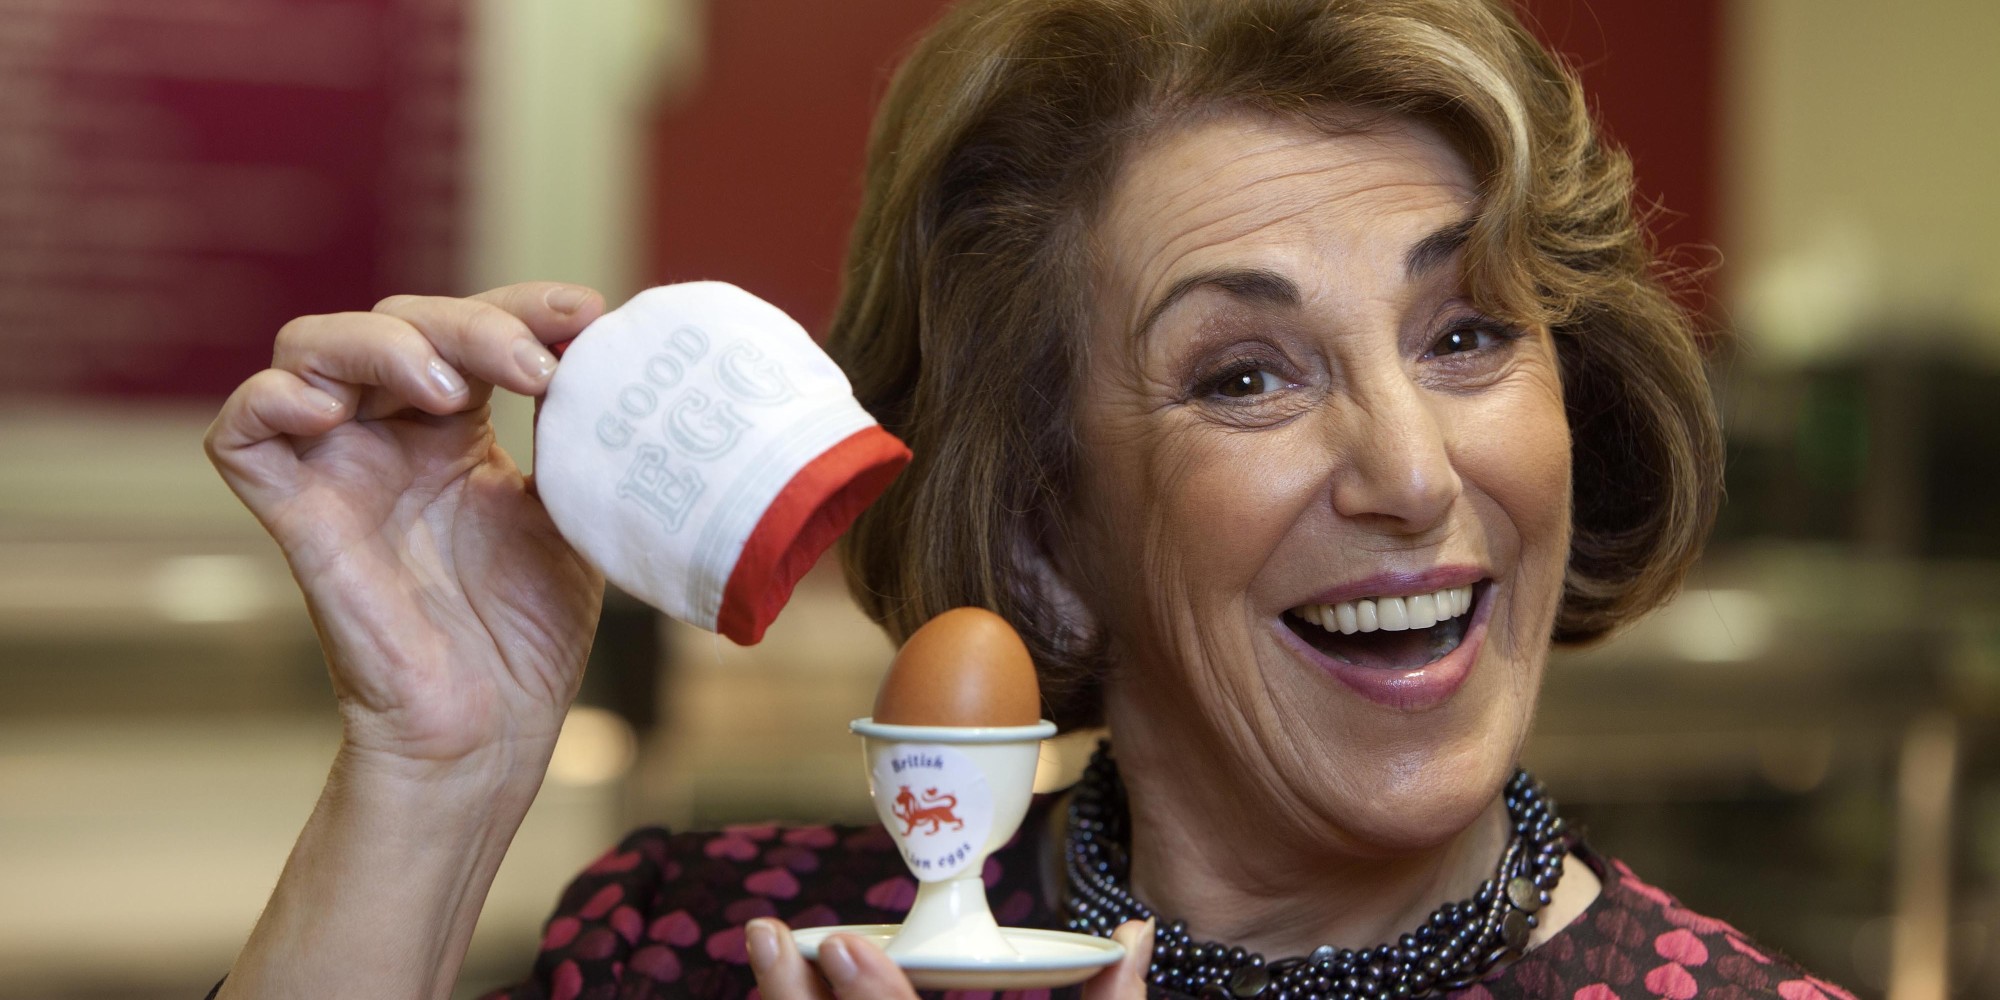 Former Health Minister Edwina Currie, whose comments fuelled the salmonella scare, described British Lion eggs as 